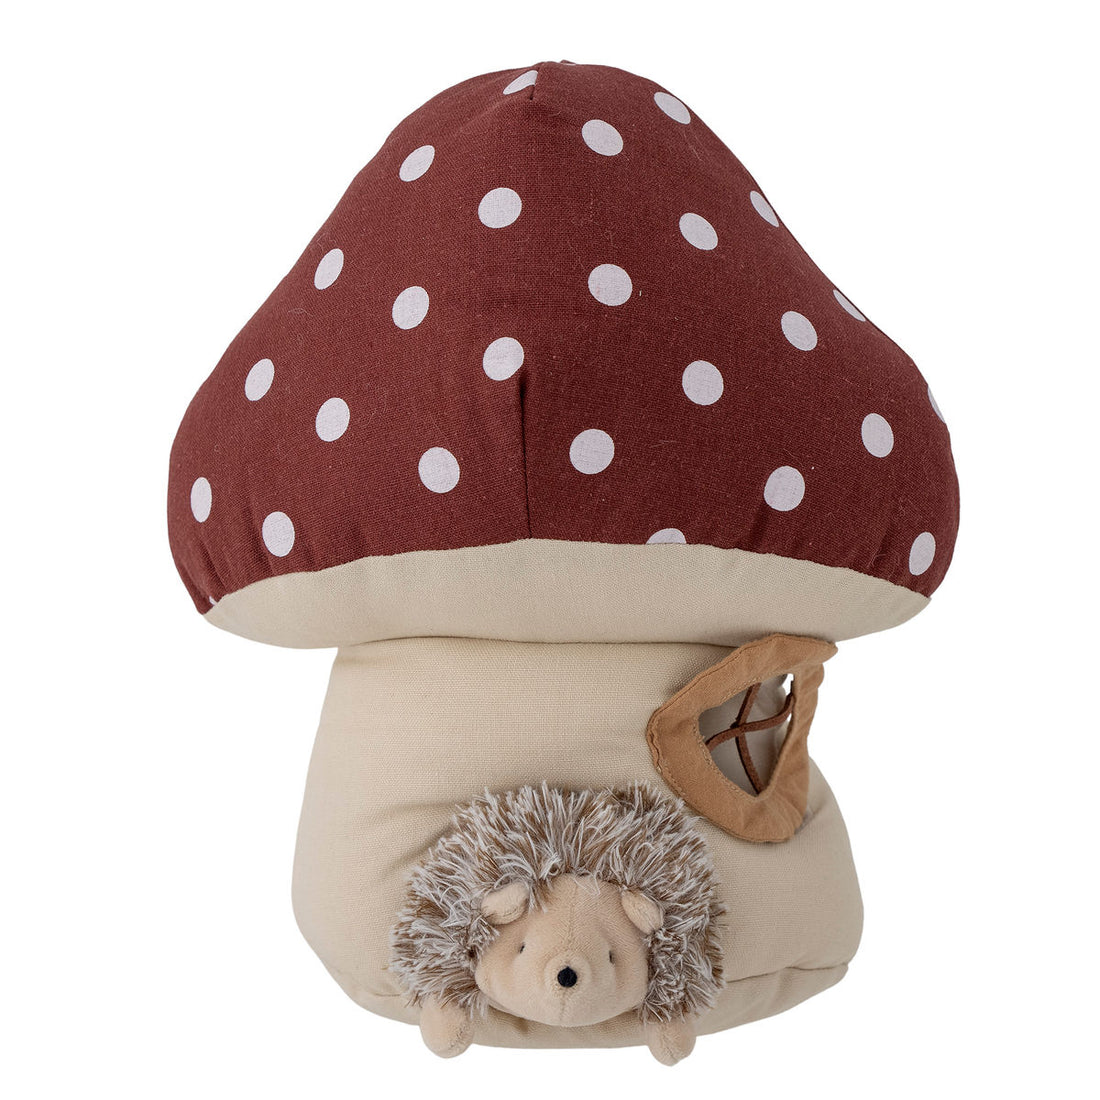 Bloomingville Mini Gaston Soft Toy, Red, Lyssna